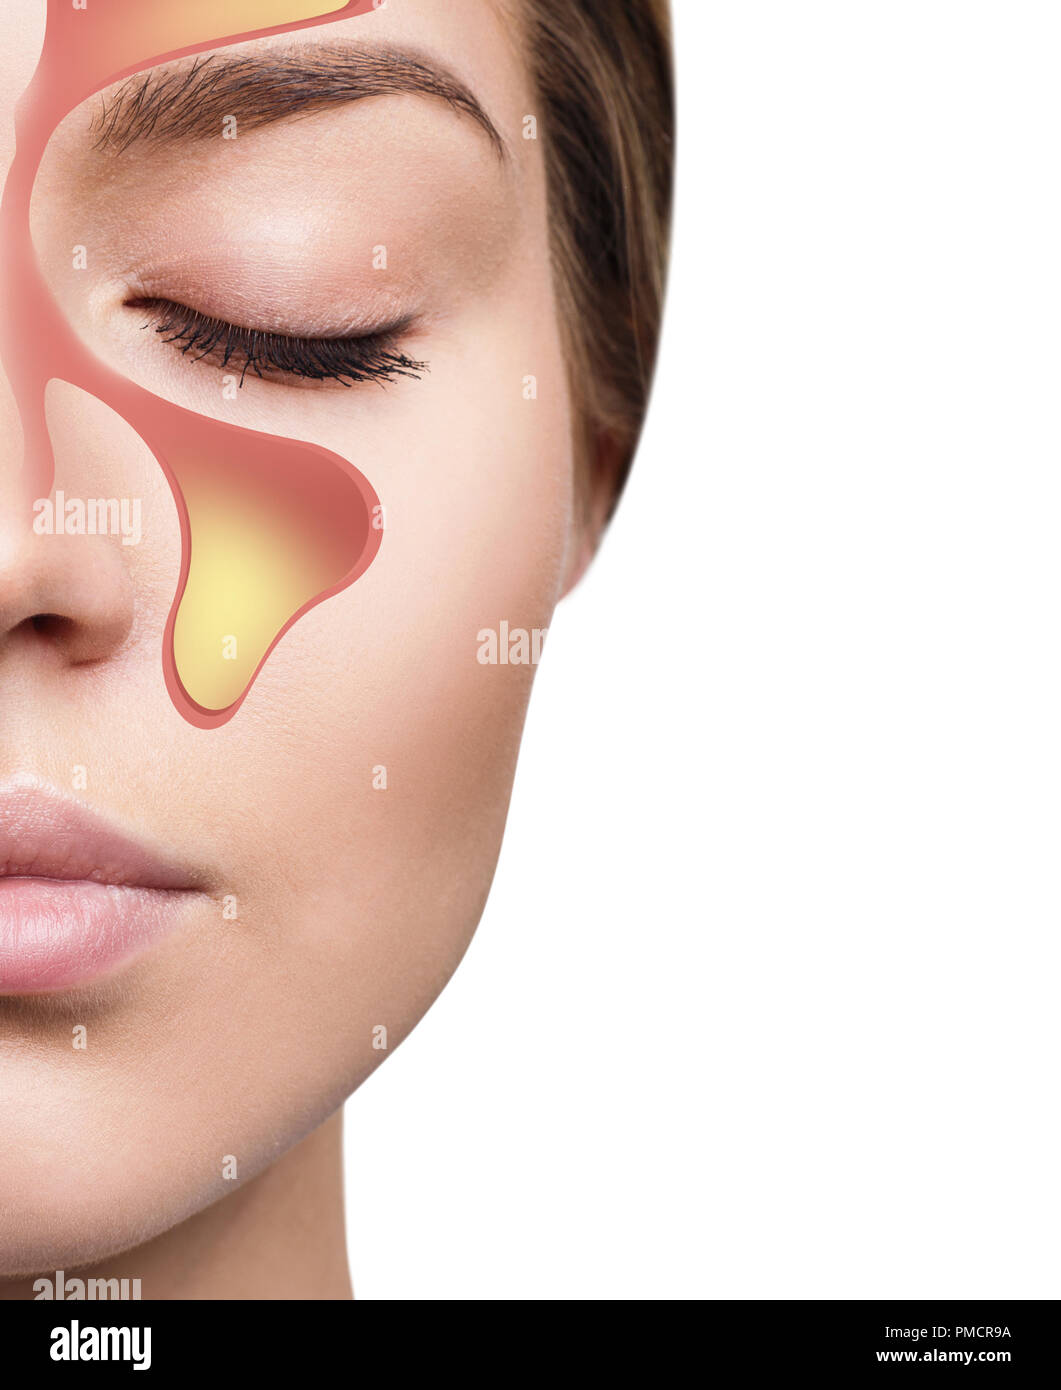 Female face shows nasal sinus with cold over white background. Stock Photo